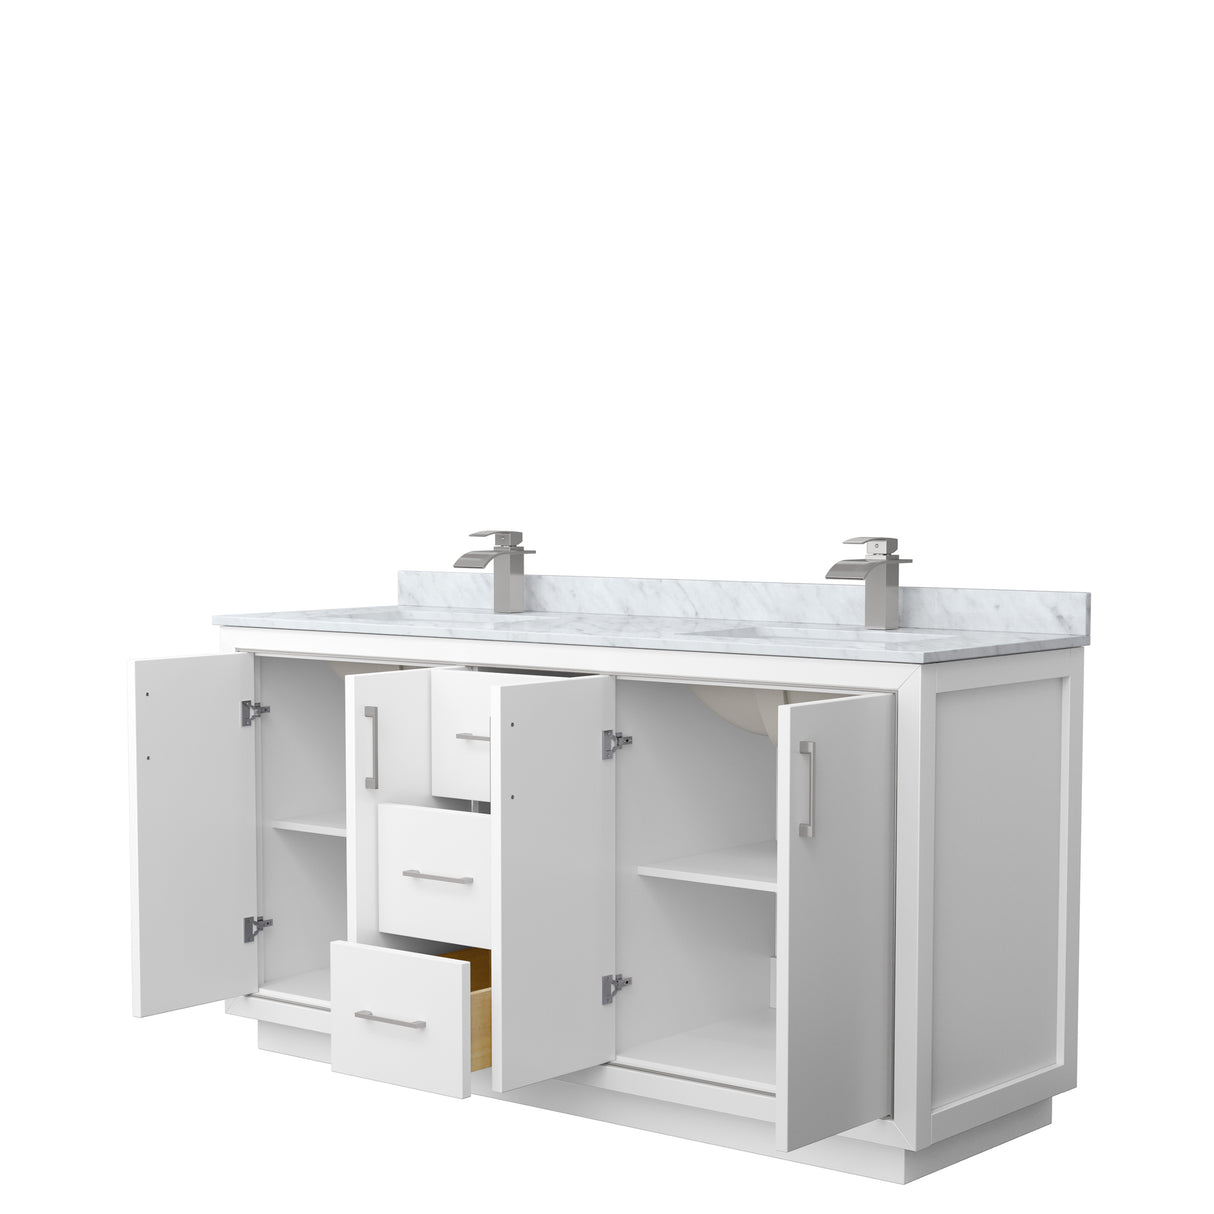 Icon 66 Inch Double Bathroom Vanity in White White Carrara Marble Countertop Undermount Square Sinks Brushed Nickel Trim